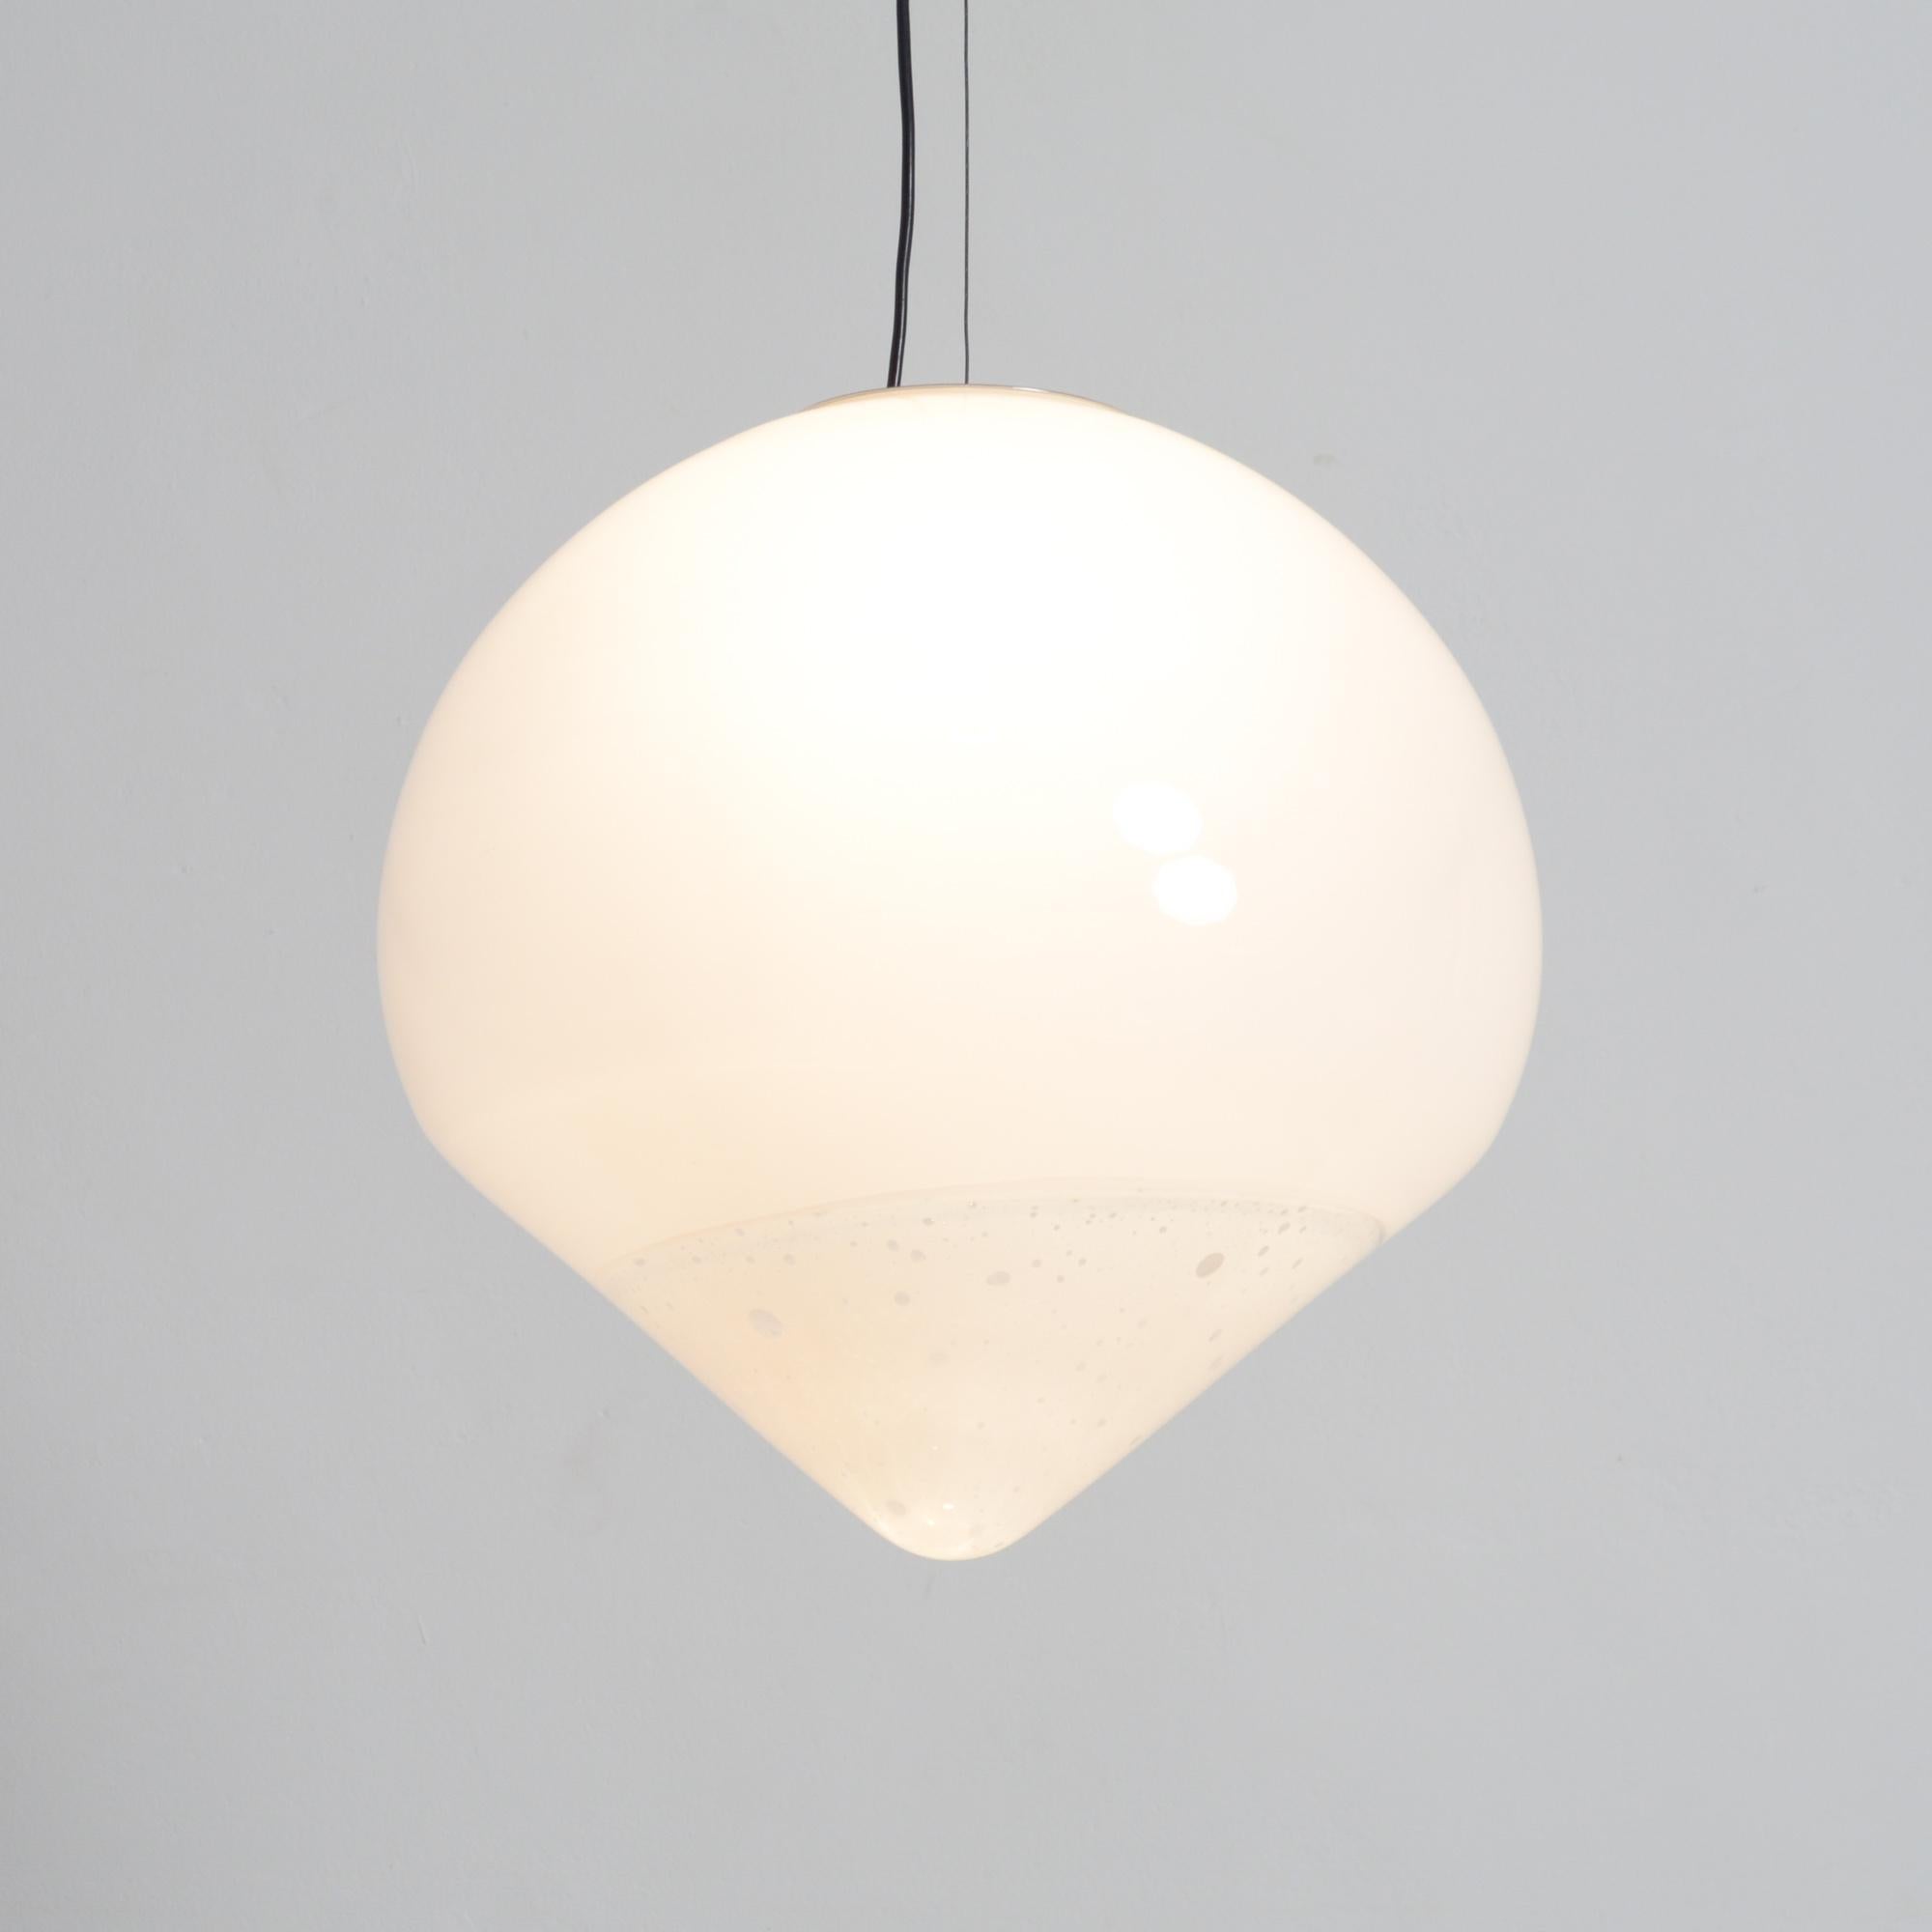 This white colored ball lamp was created by Alfredo Barbini in the 1970s.
It is a unique lamp made of mouth-blown Murano glass. It is a white dome with a frosted cone shaped bottom.
This amazing ball lamp has an impressive size, an extraordinary